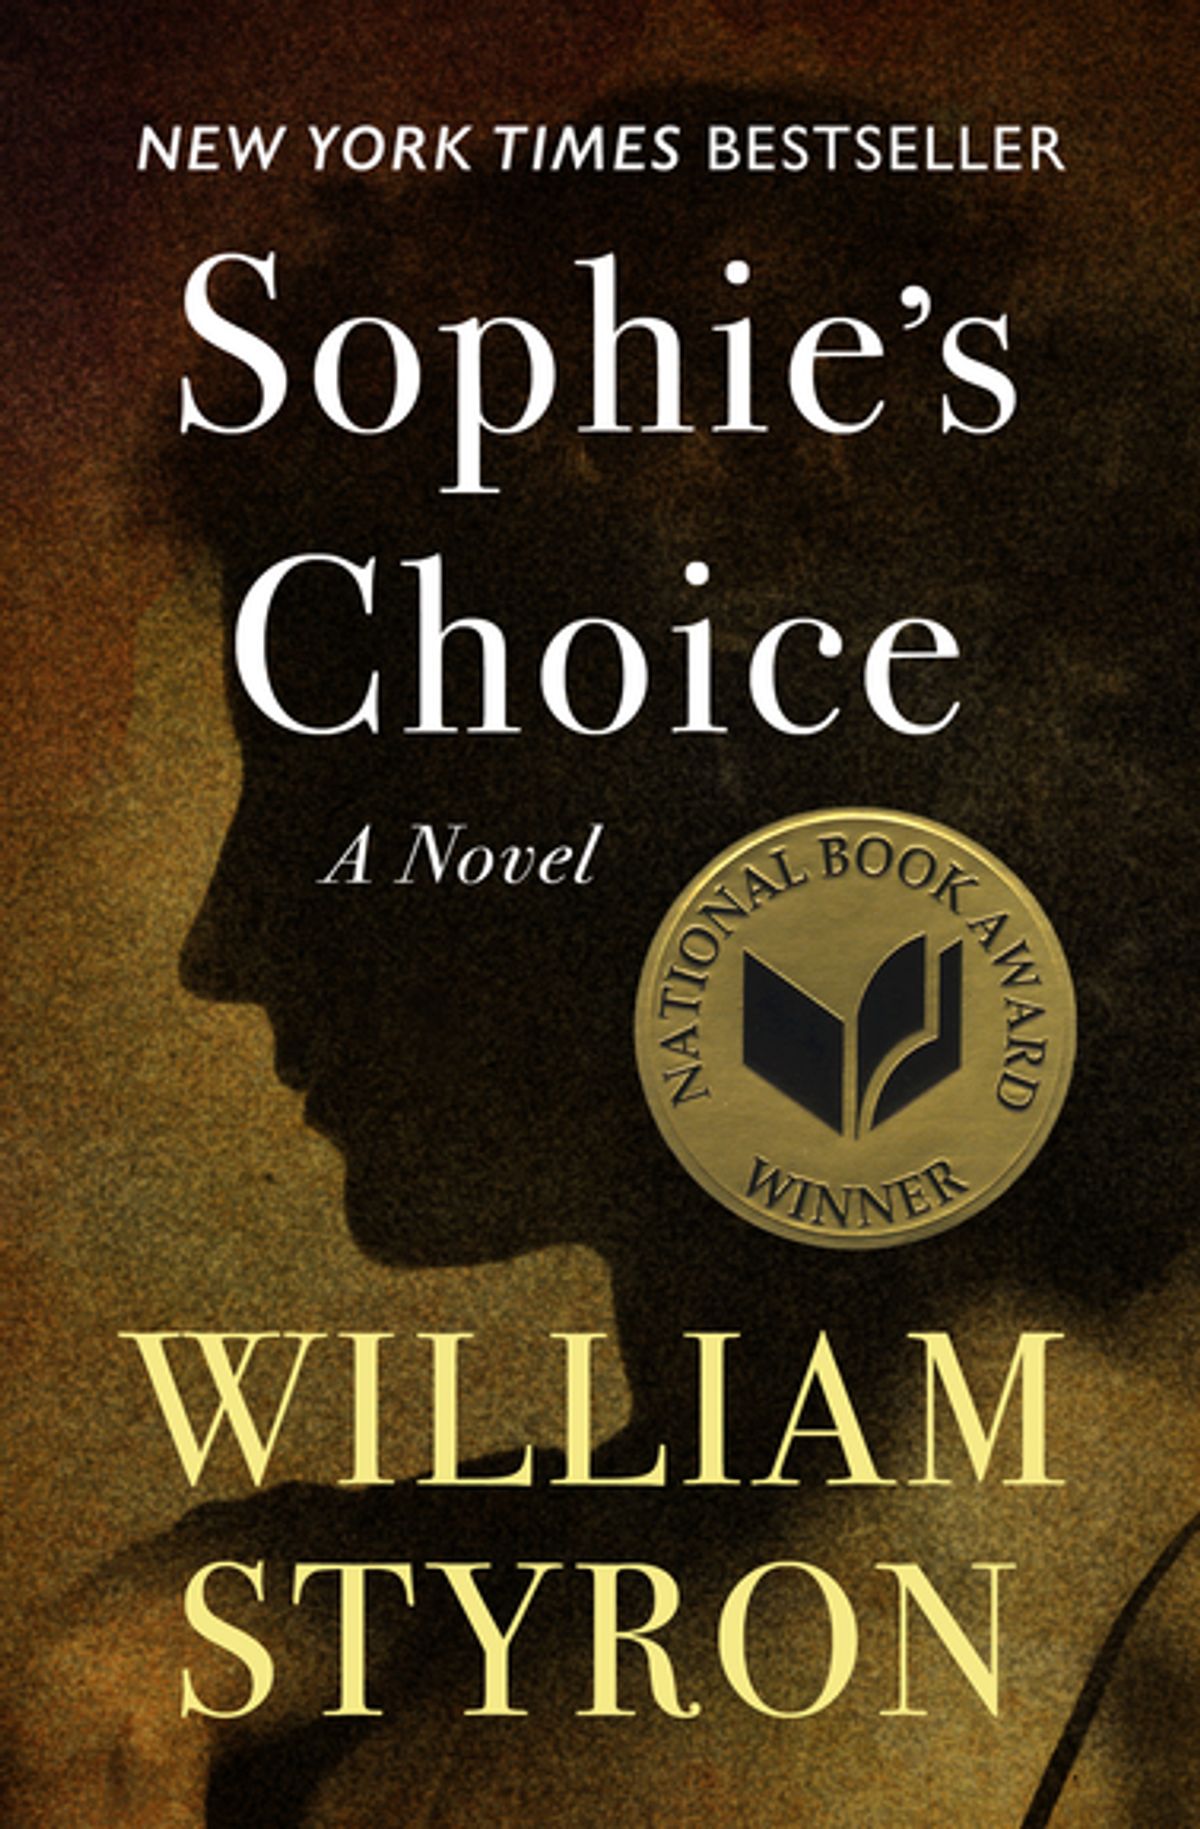 Image for "Sophie's Choice"